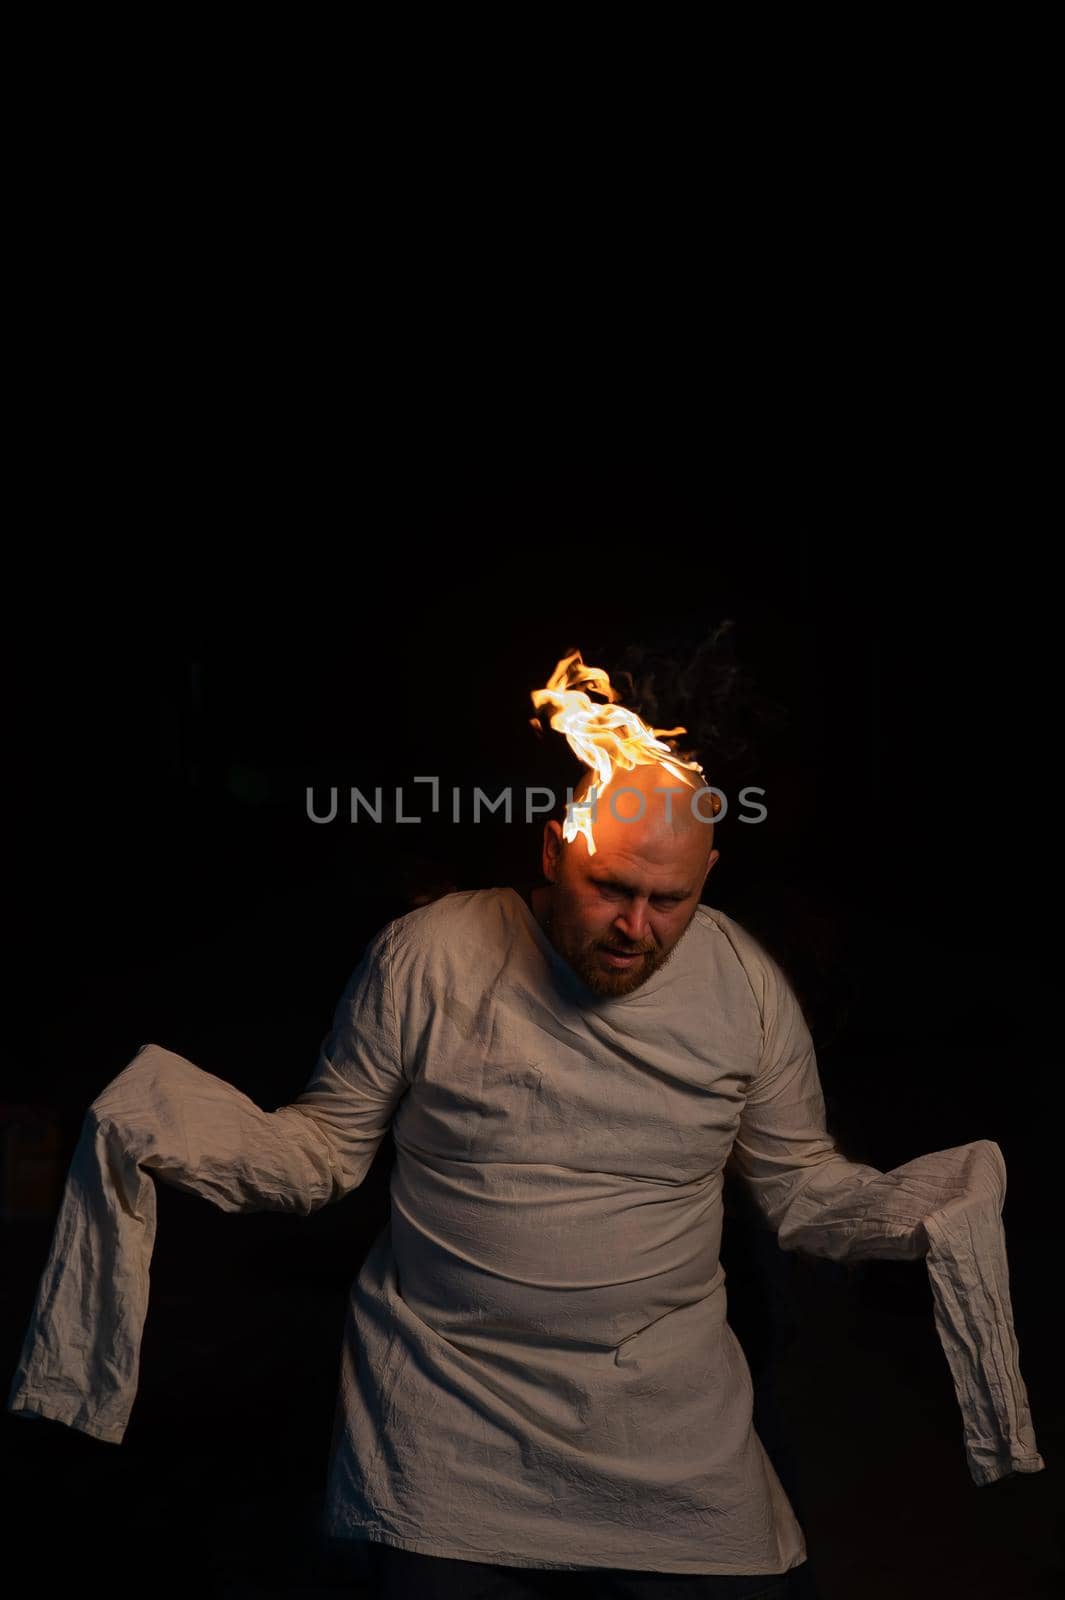 Bald man in a straitjacket with a burning head on a dark background. by mrwed54